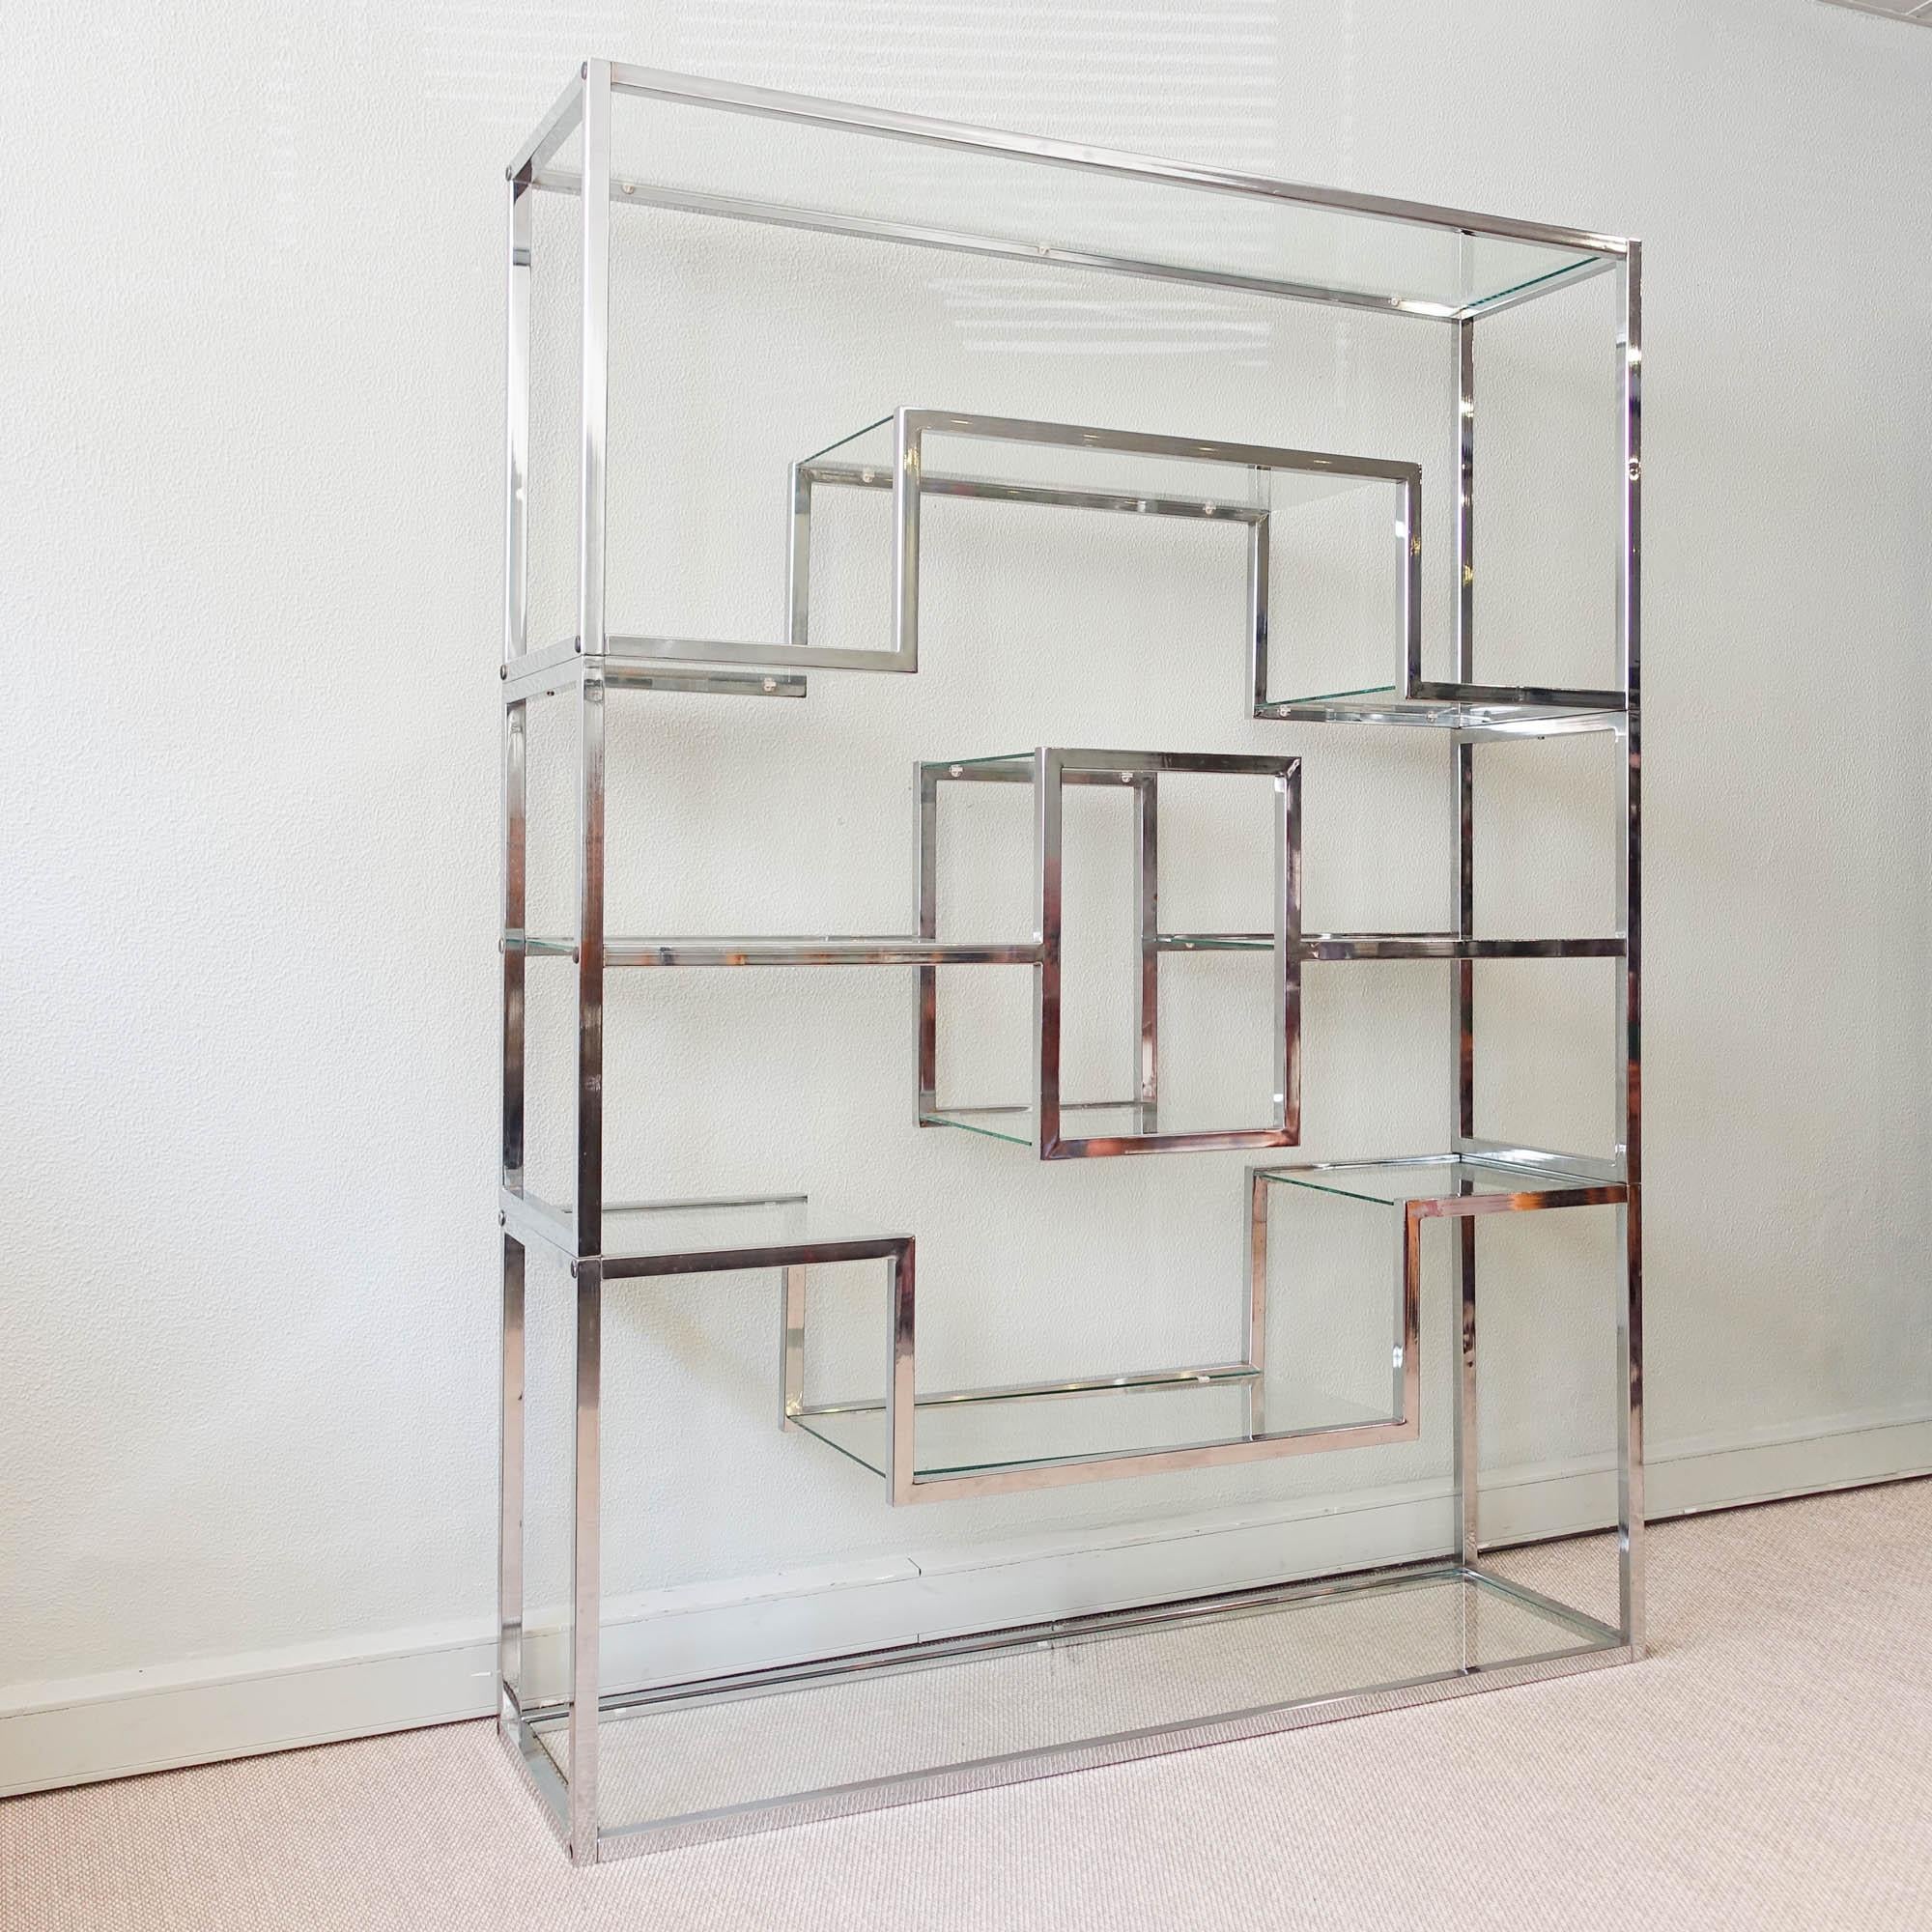 This shelving unit was designed in the style of Romeo Rega, in Italy, during the 1970s. Each of the five shelves supports a transparent glass plate which are secured in place with small plastic supports. It is a sleek and functional design that is